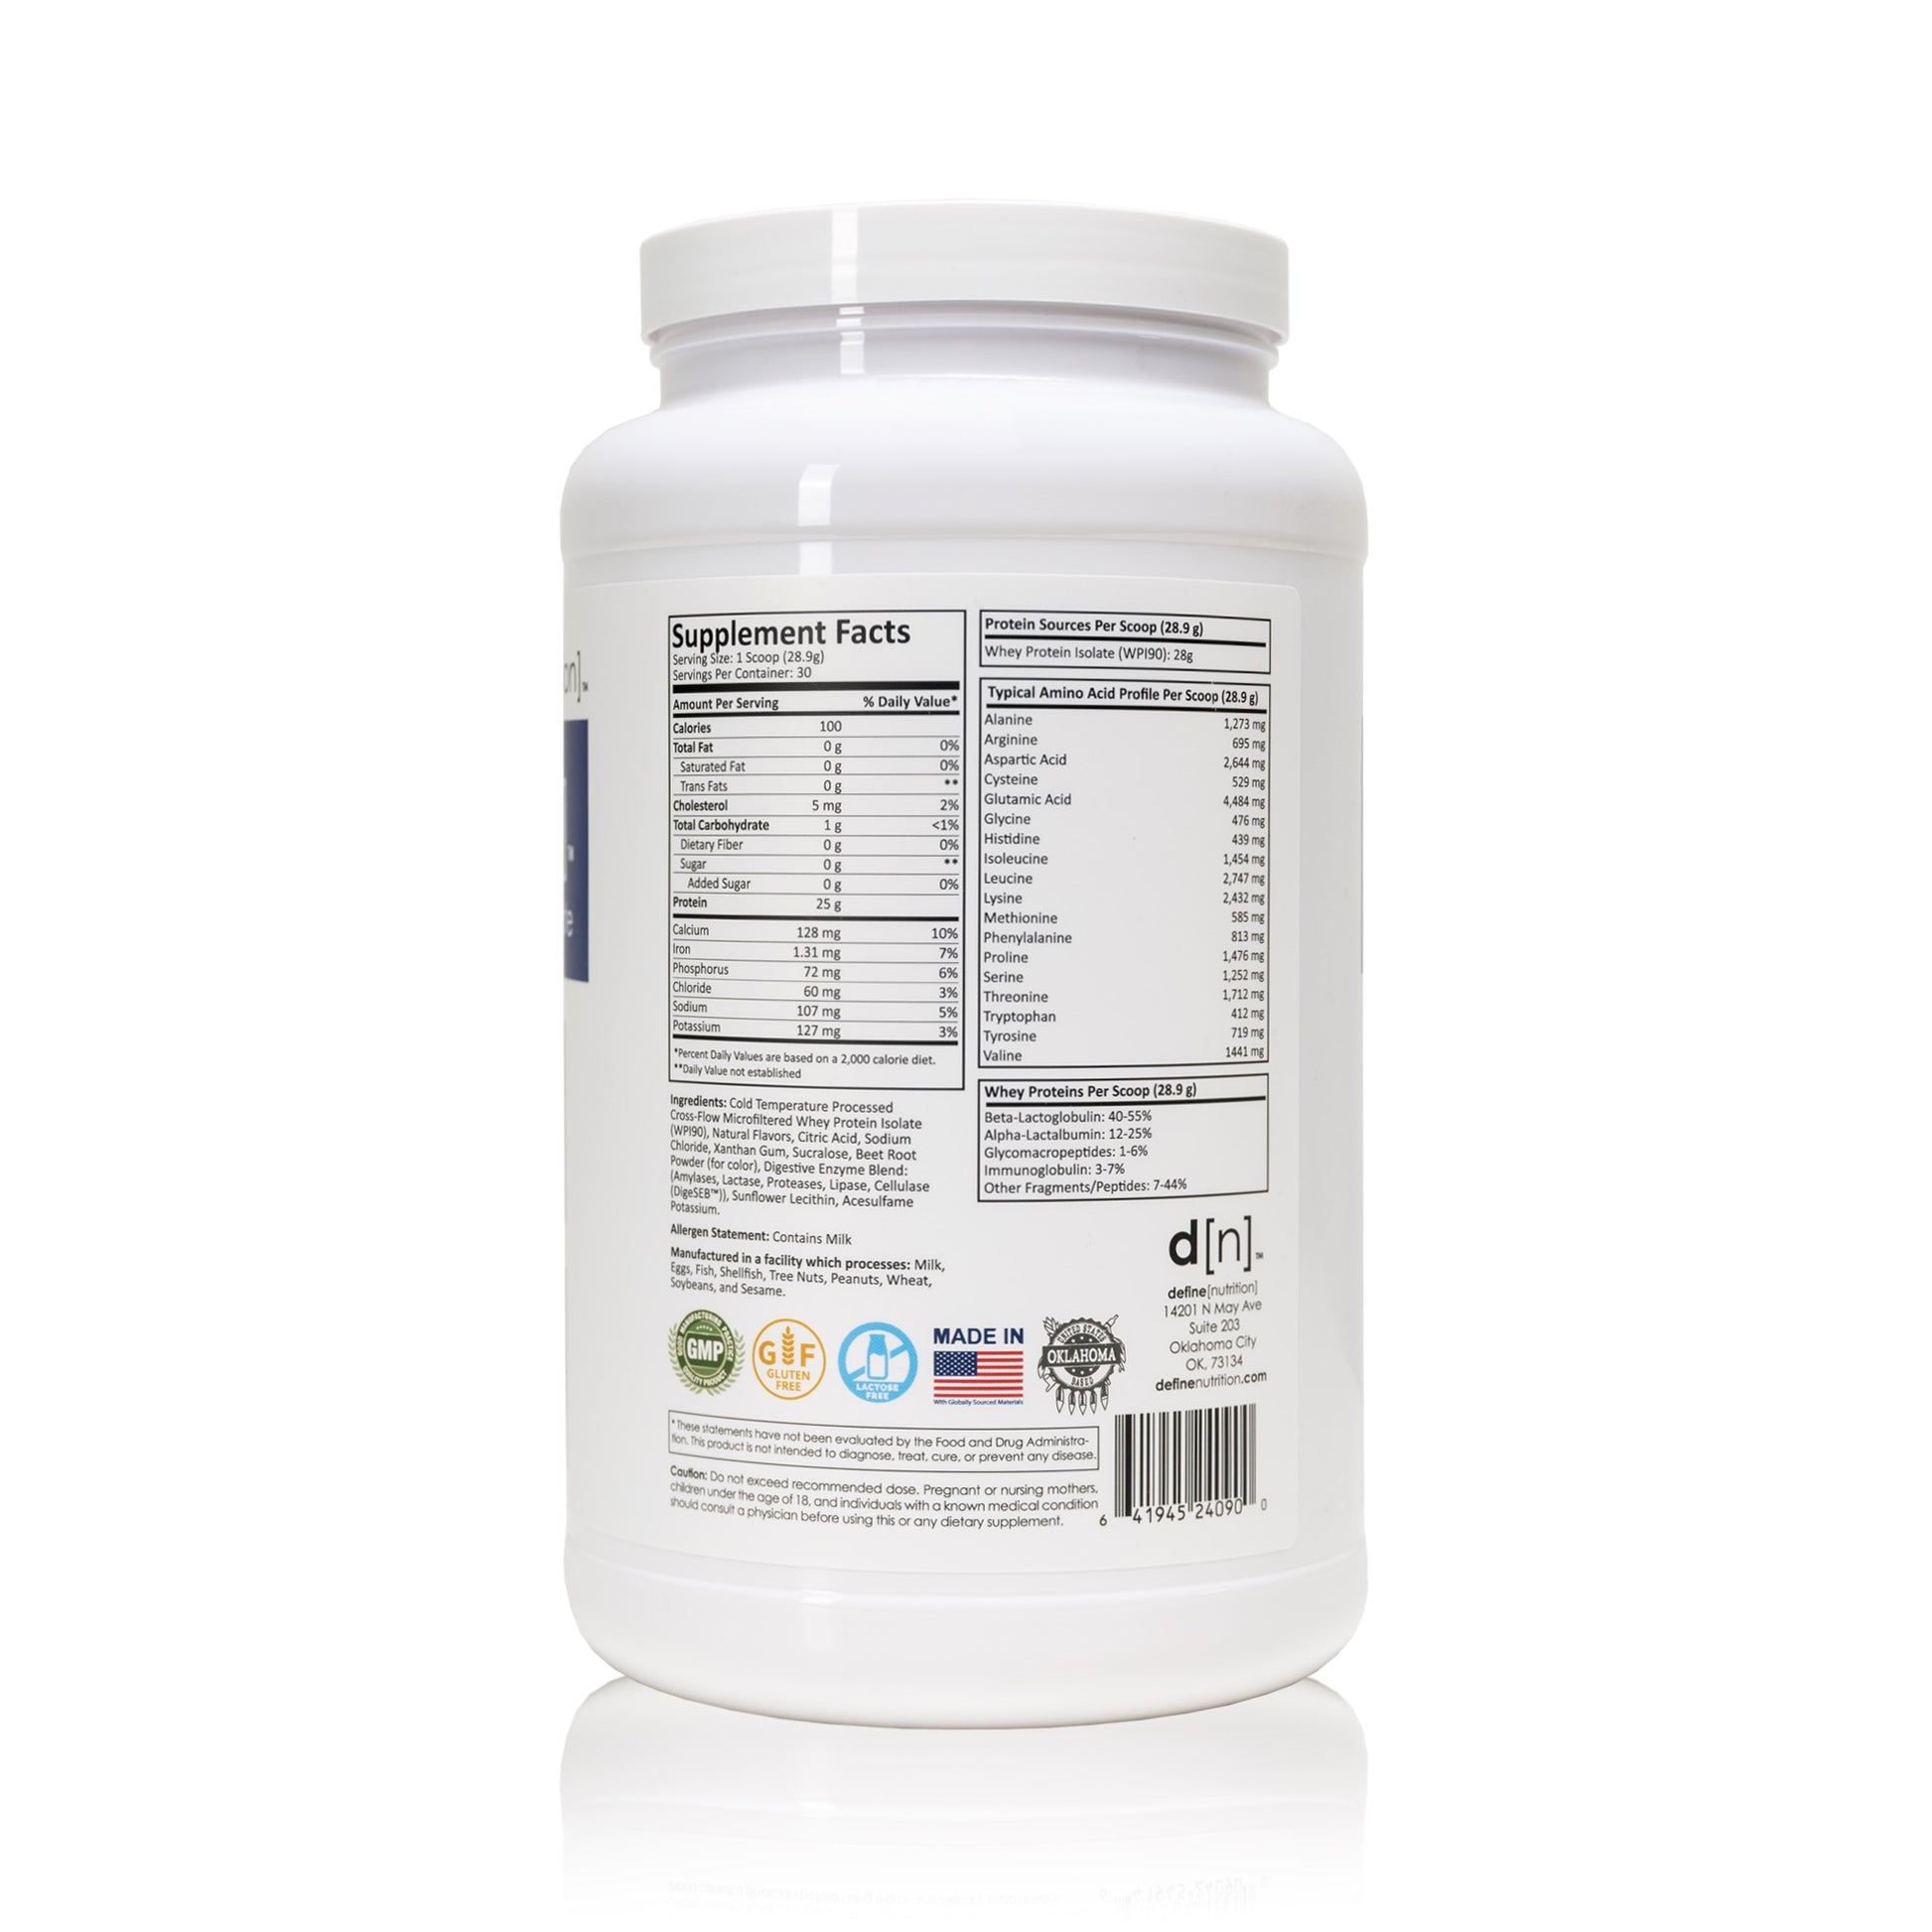 Whey Protein Isolate 90%